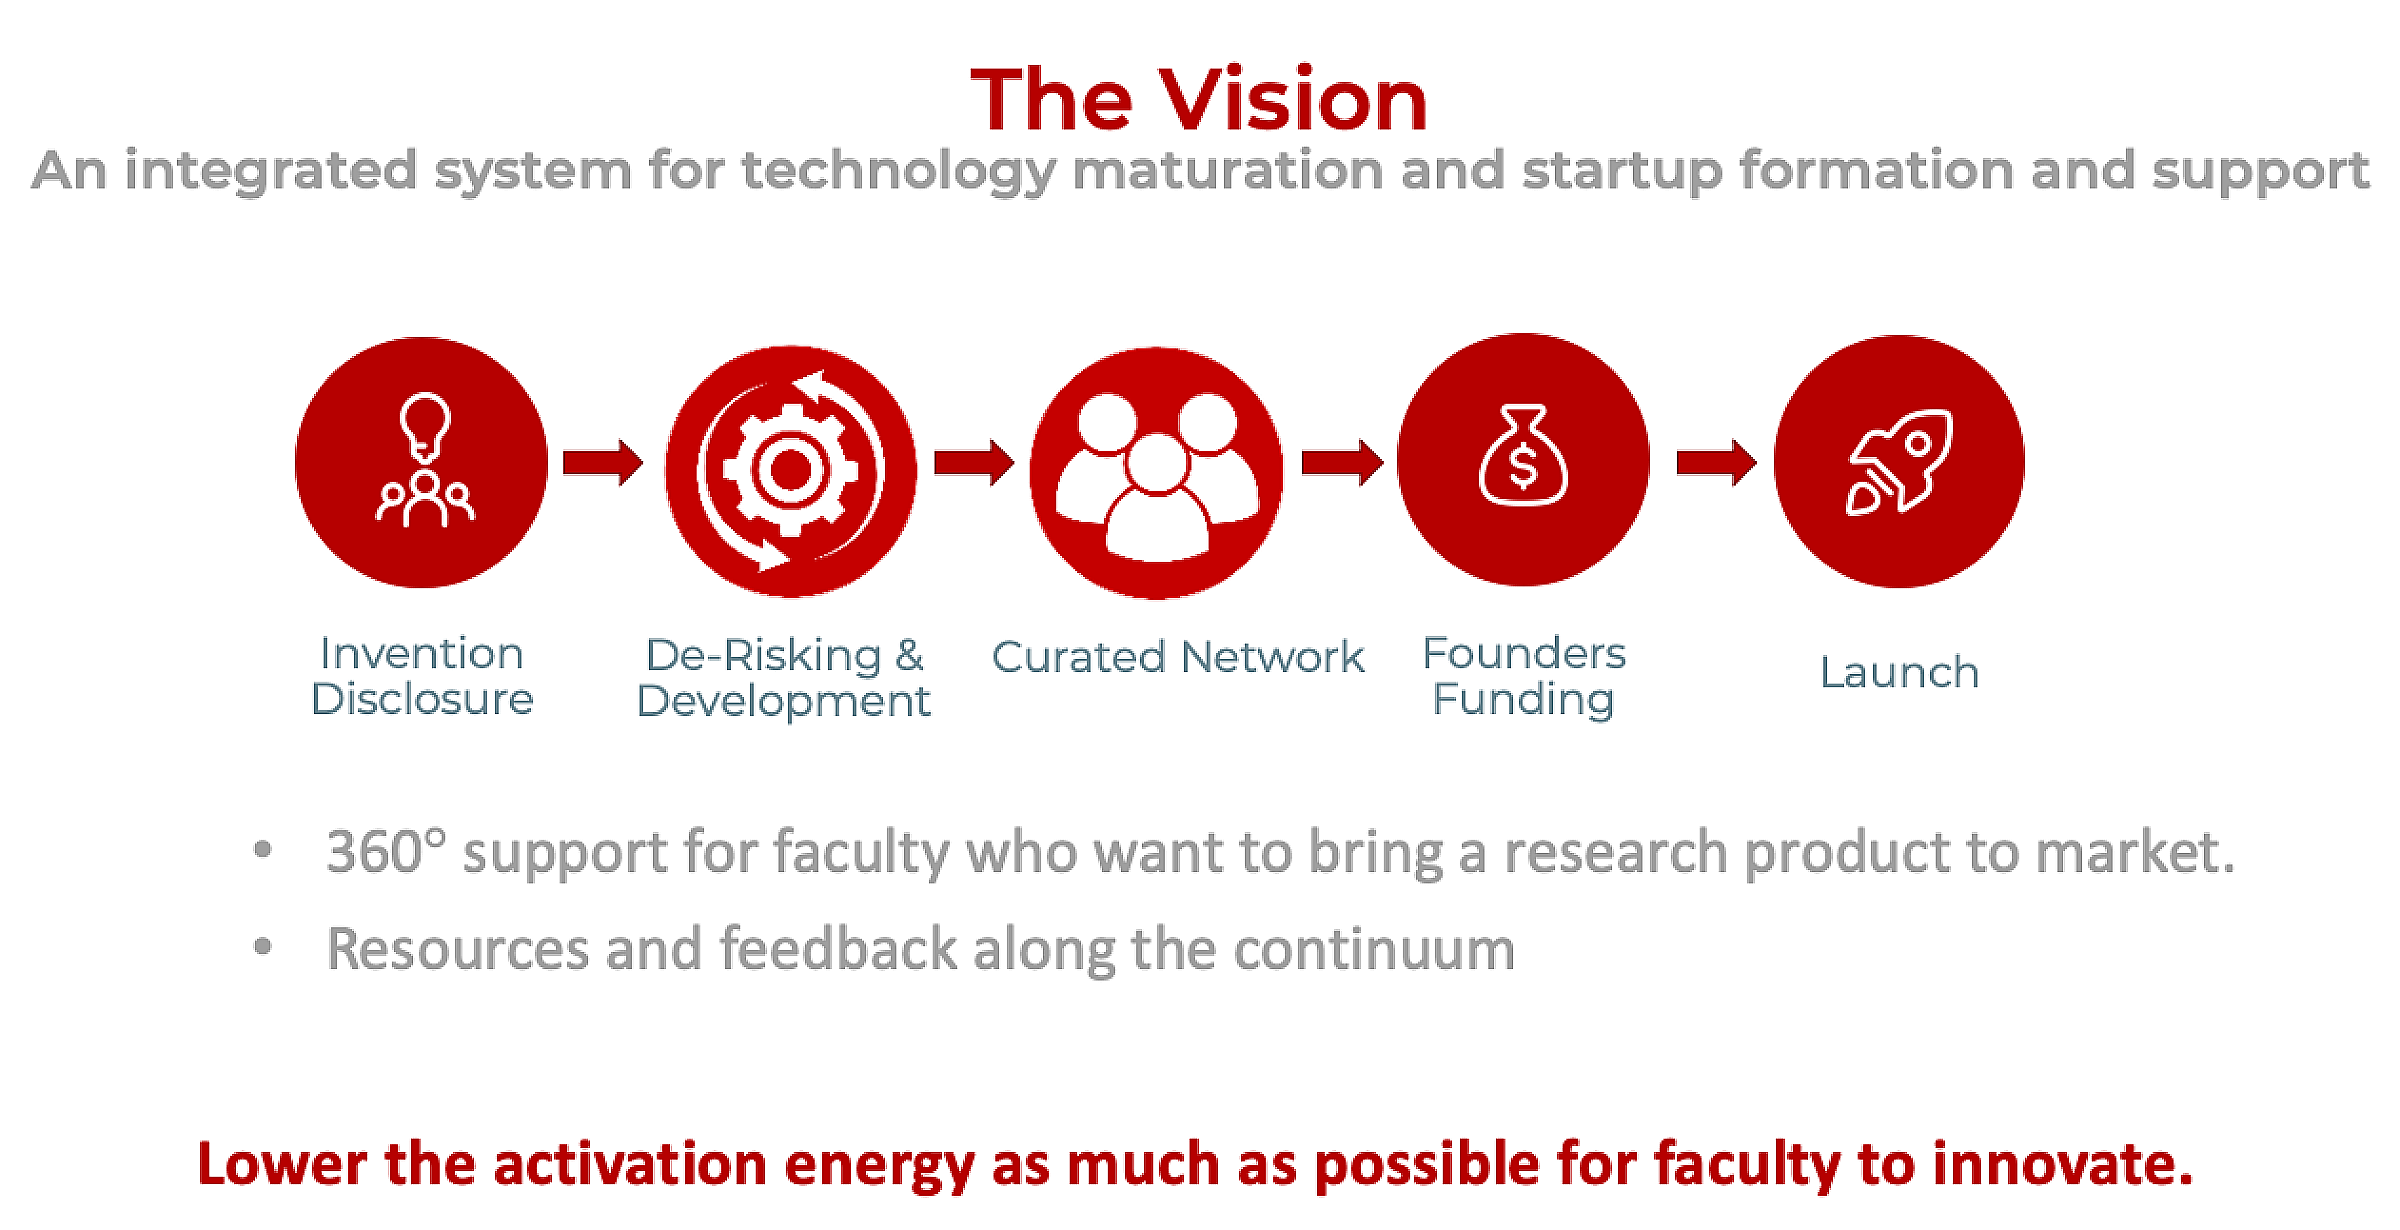 Vision for an integrated system for technology maturation, startup formation, and support at University of Utah